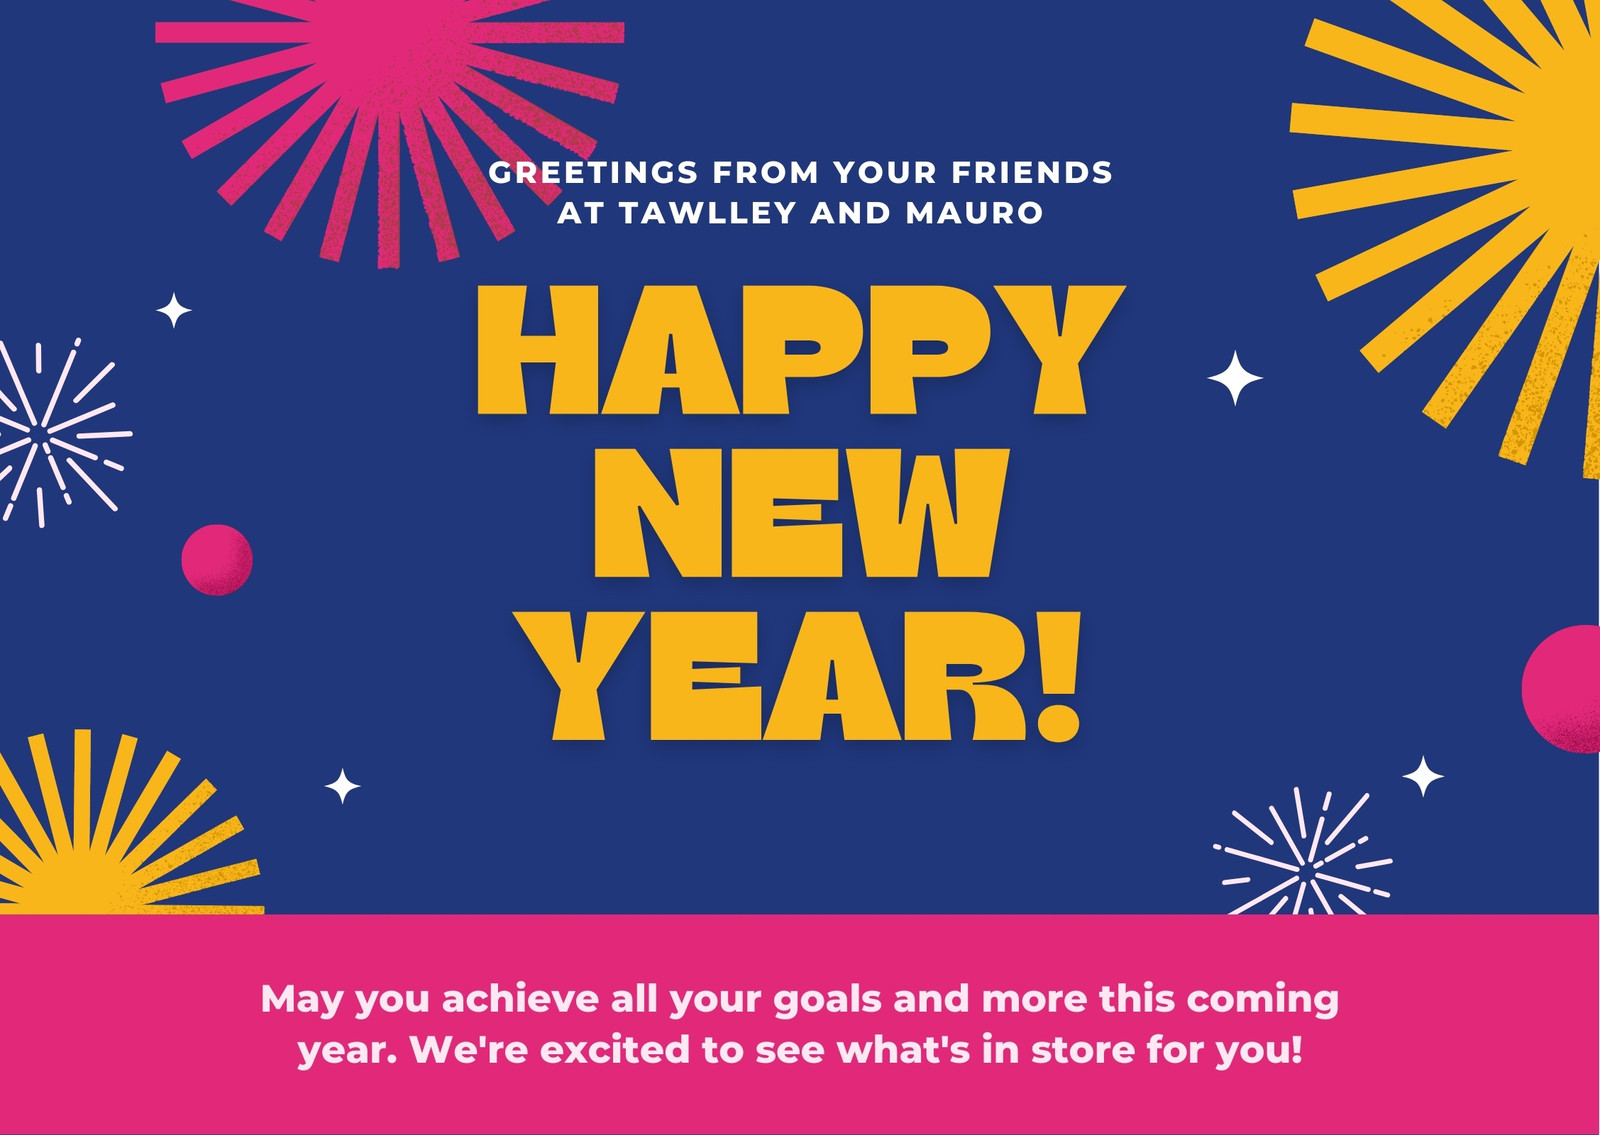 Free and customizable New Year eCard templates